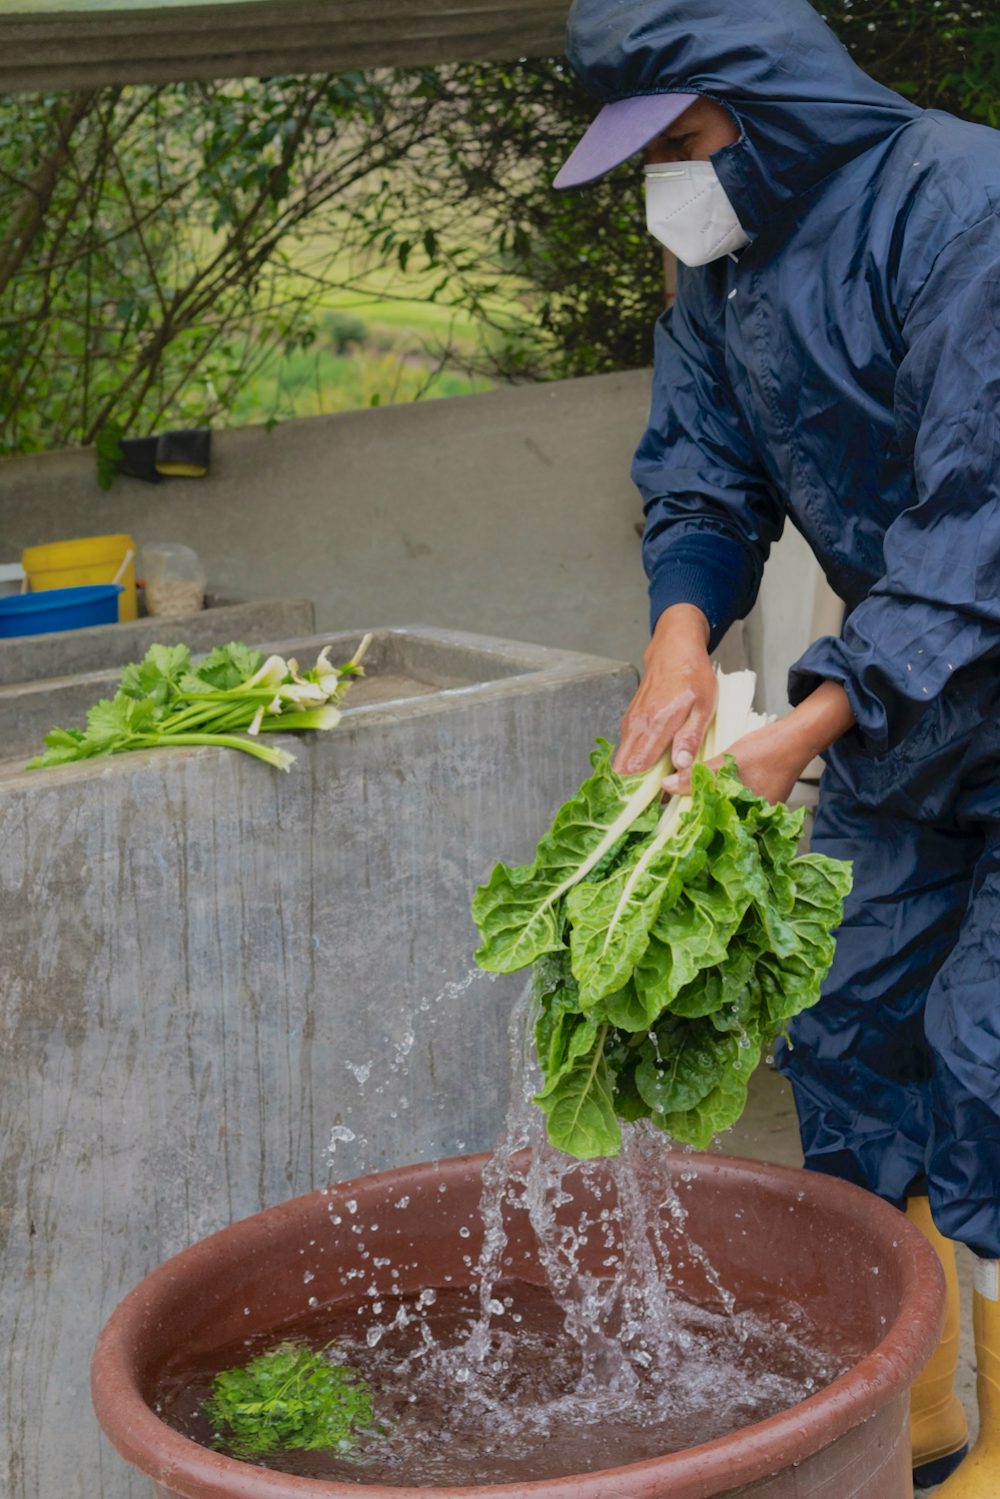 A man washes lettuce in a bucket.